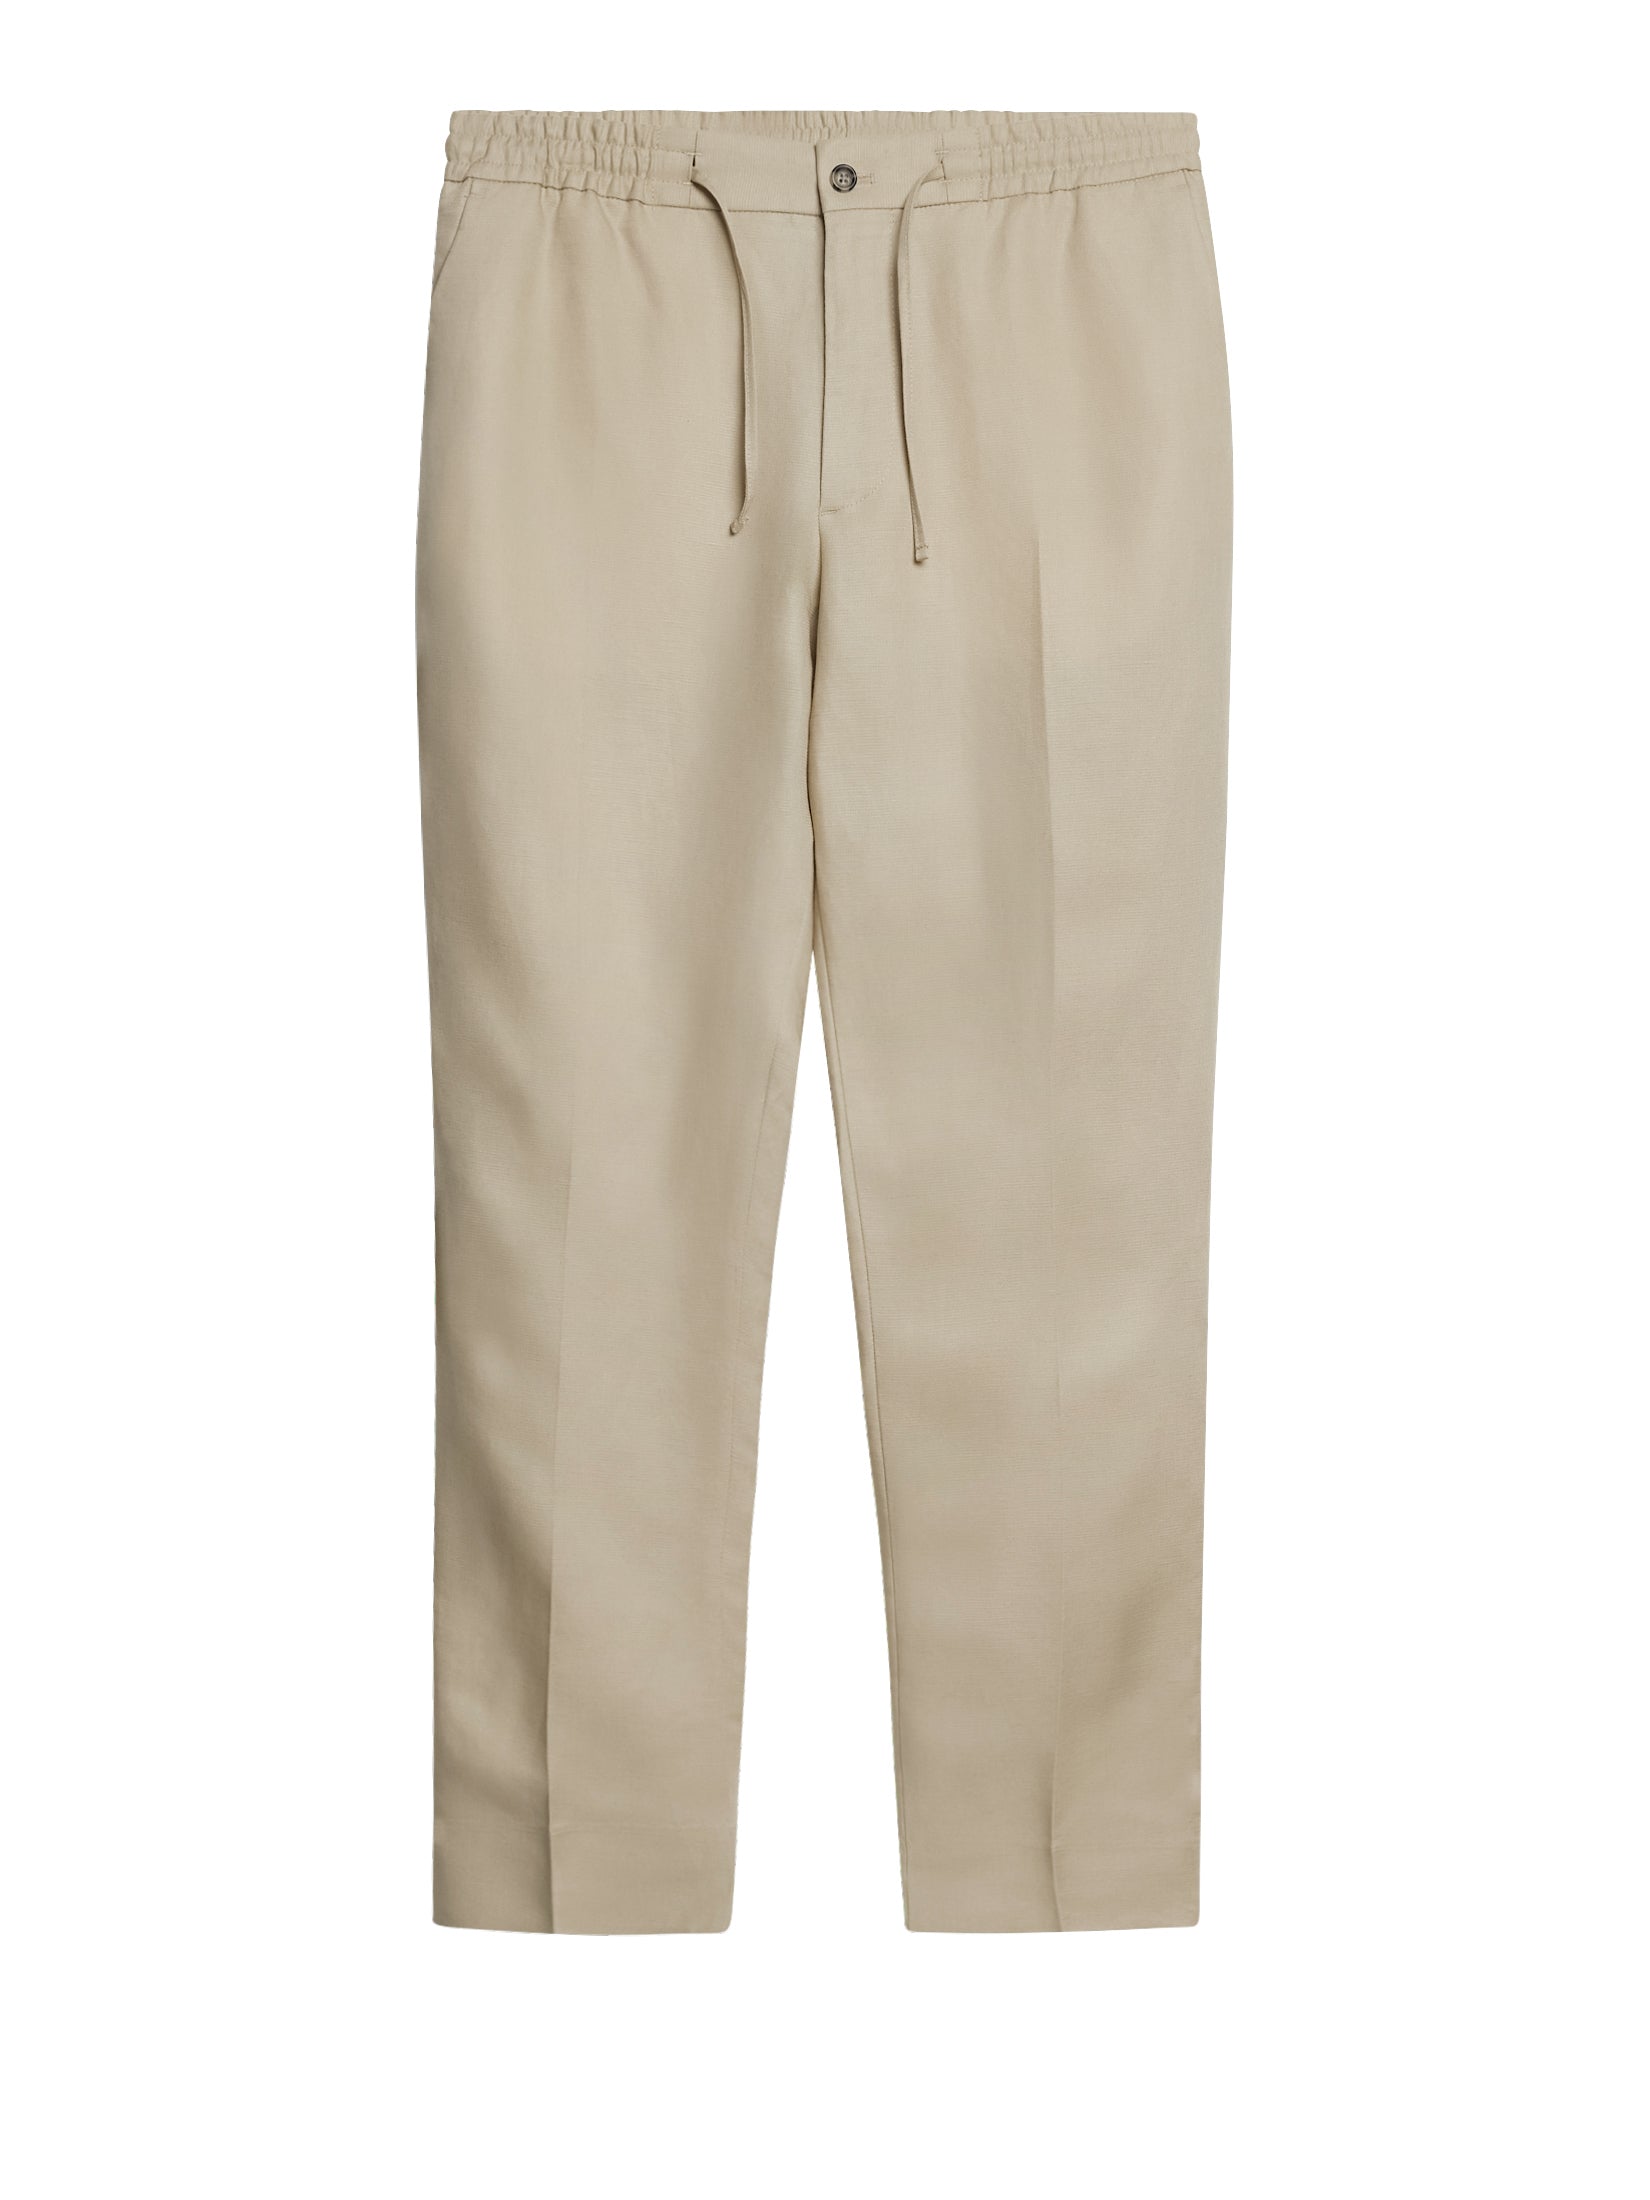 Uniqlo Mens Trousers Chinos  Joggers  Men Linen Blend Relaxed Fit  Trousers Beige  Iniziative Immobiliari